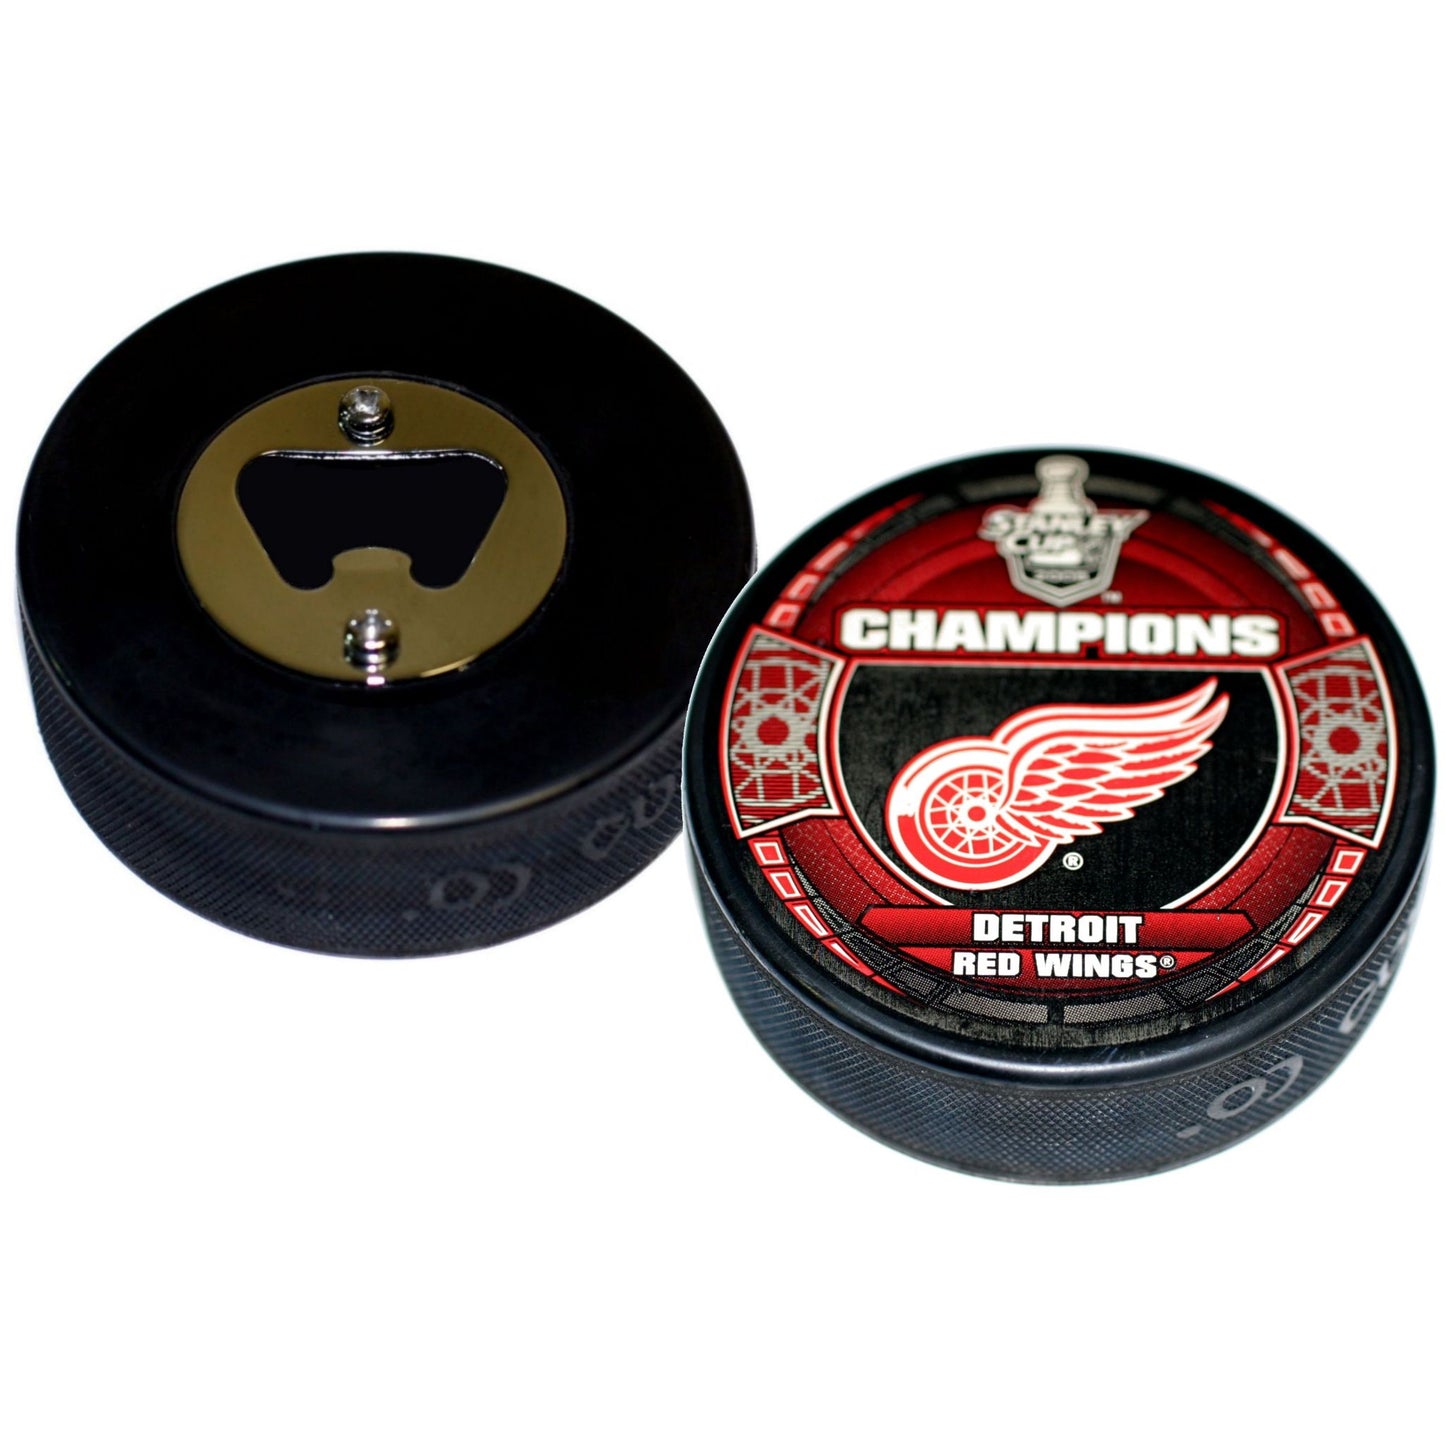 Detroit Red Wings 2008 Stanley Cup Champions Hockey Puck Bottle Opener